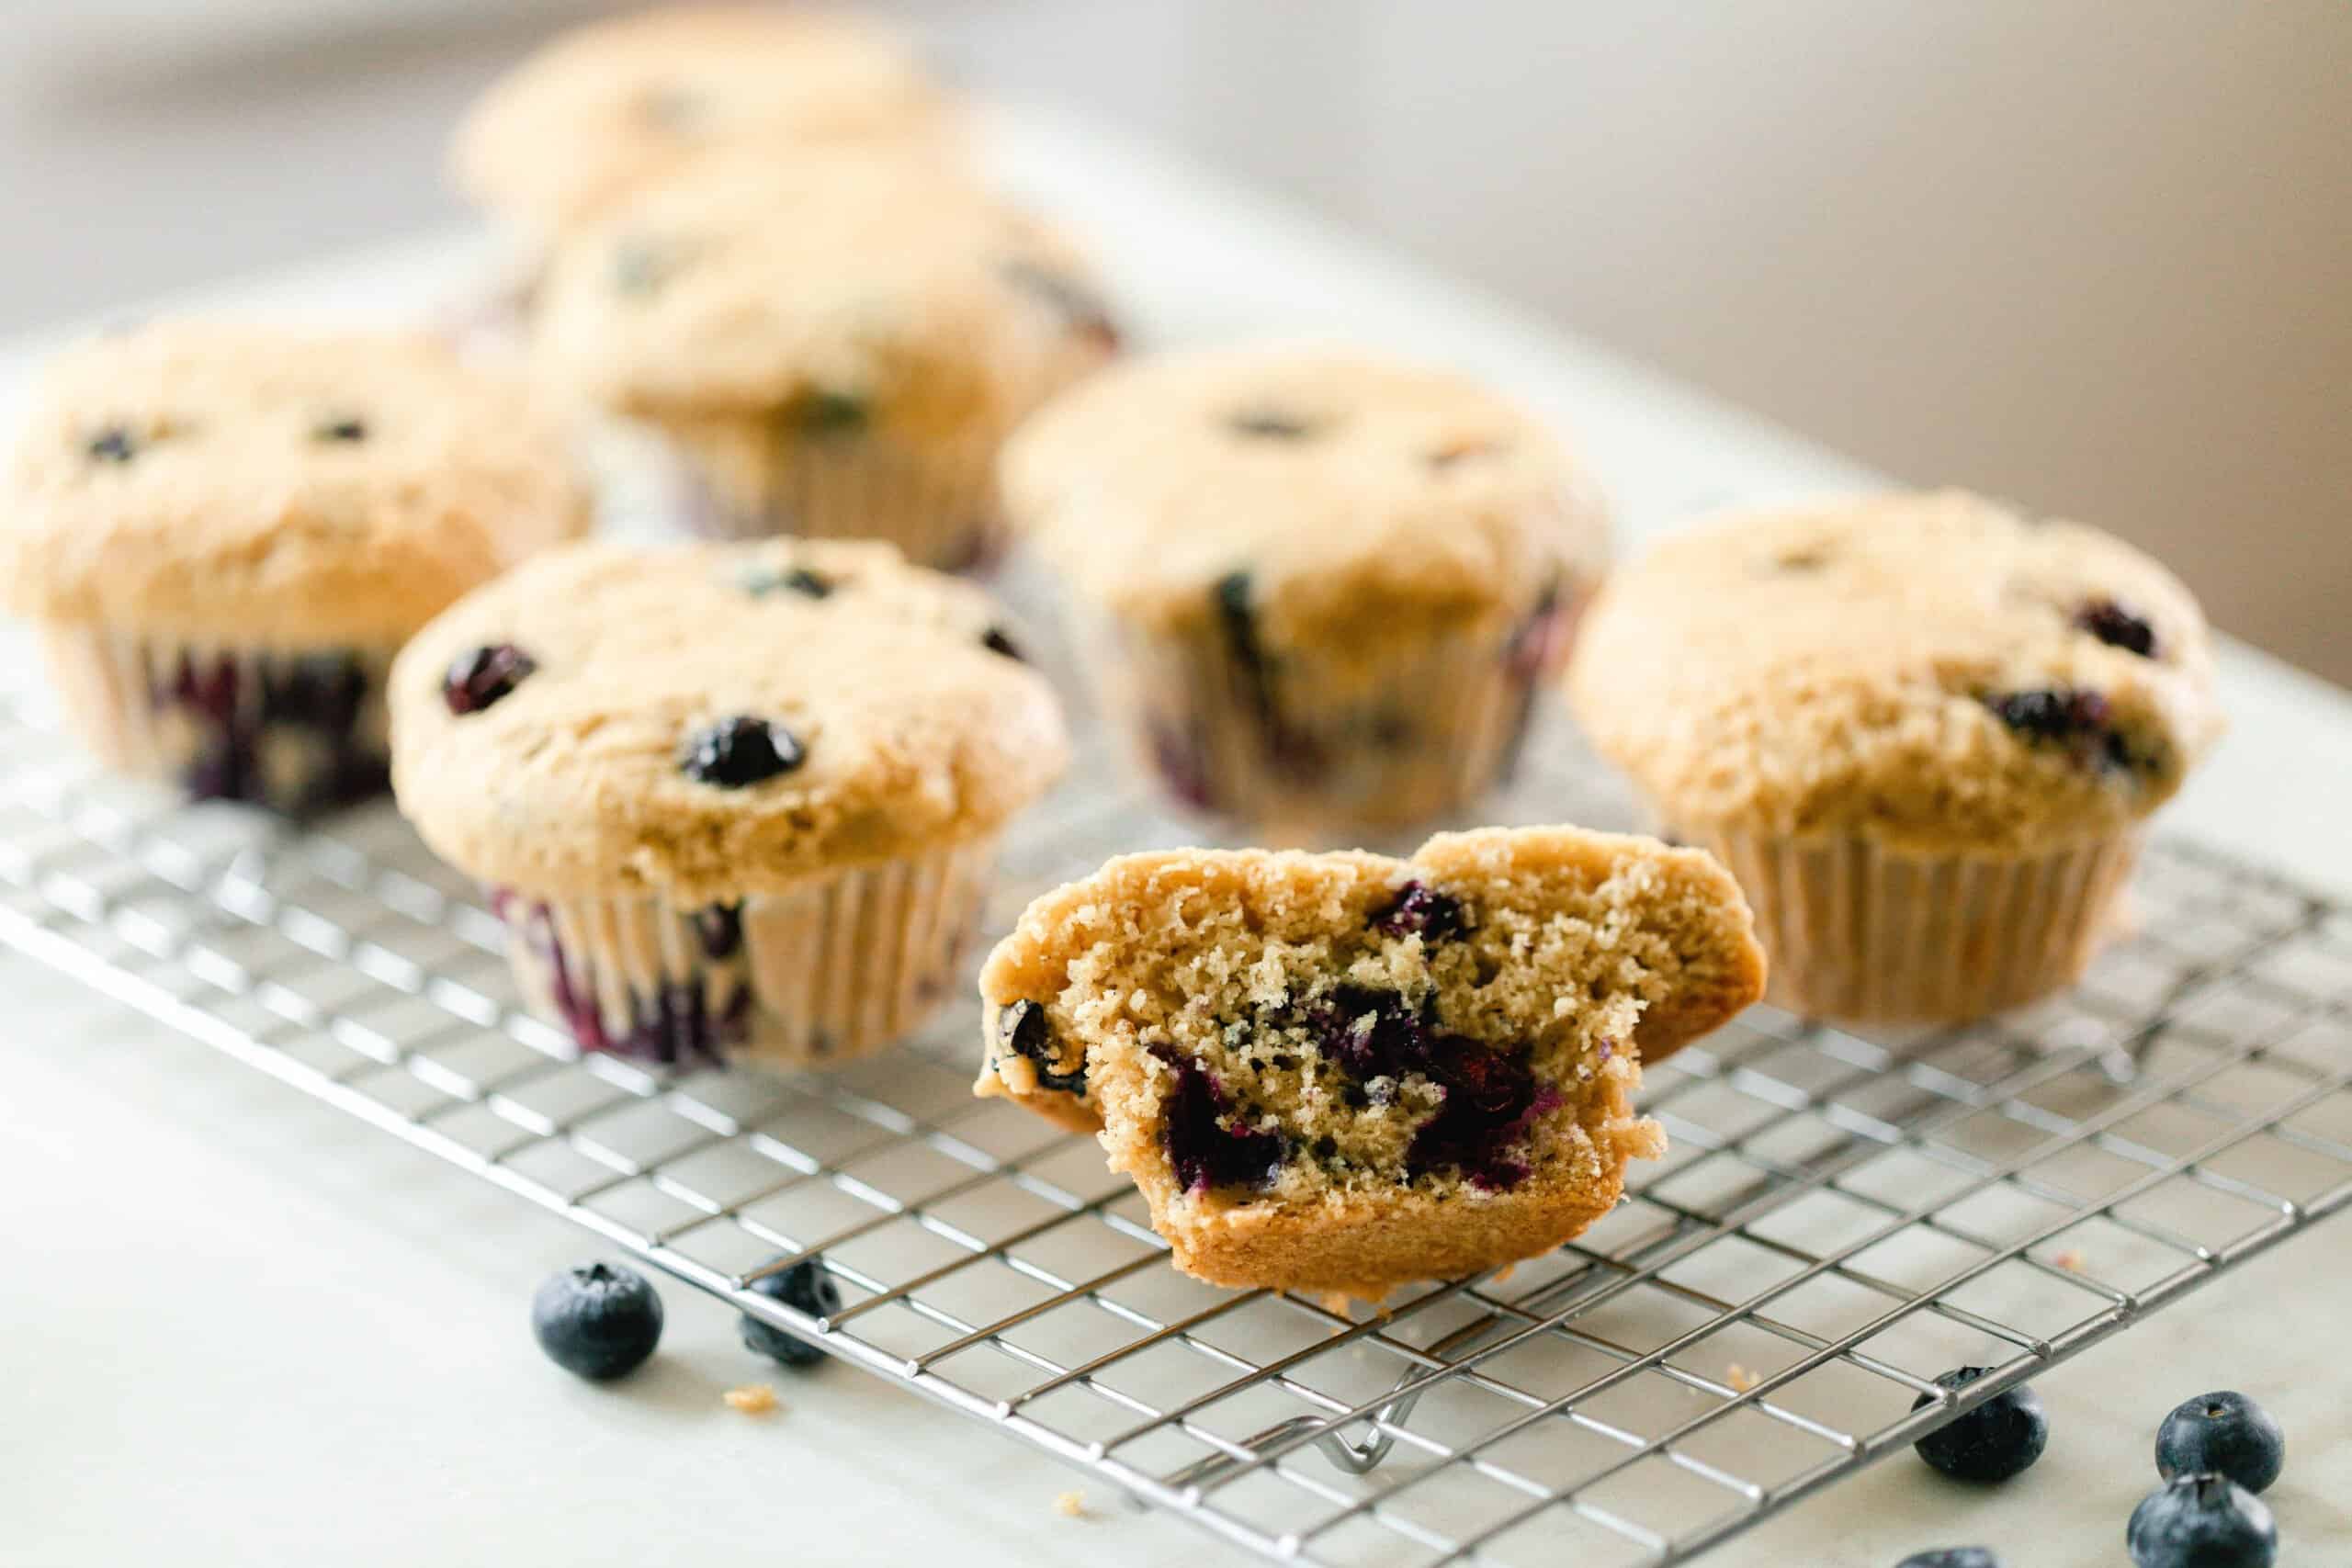 sourdough blueberry muffins on a wire rack on a white countertop with blueberries scattered around on the counter. The front muffin is sliced in half.